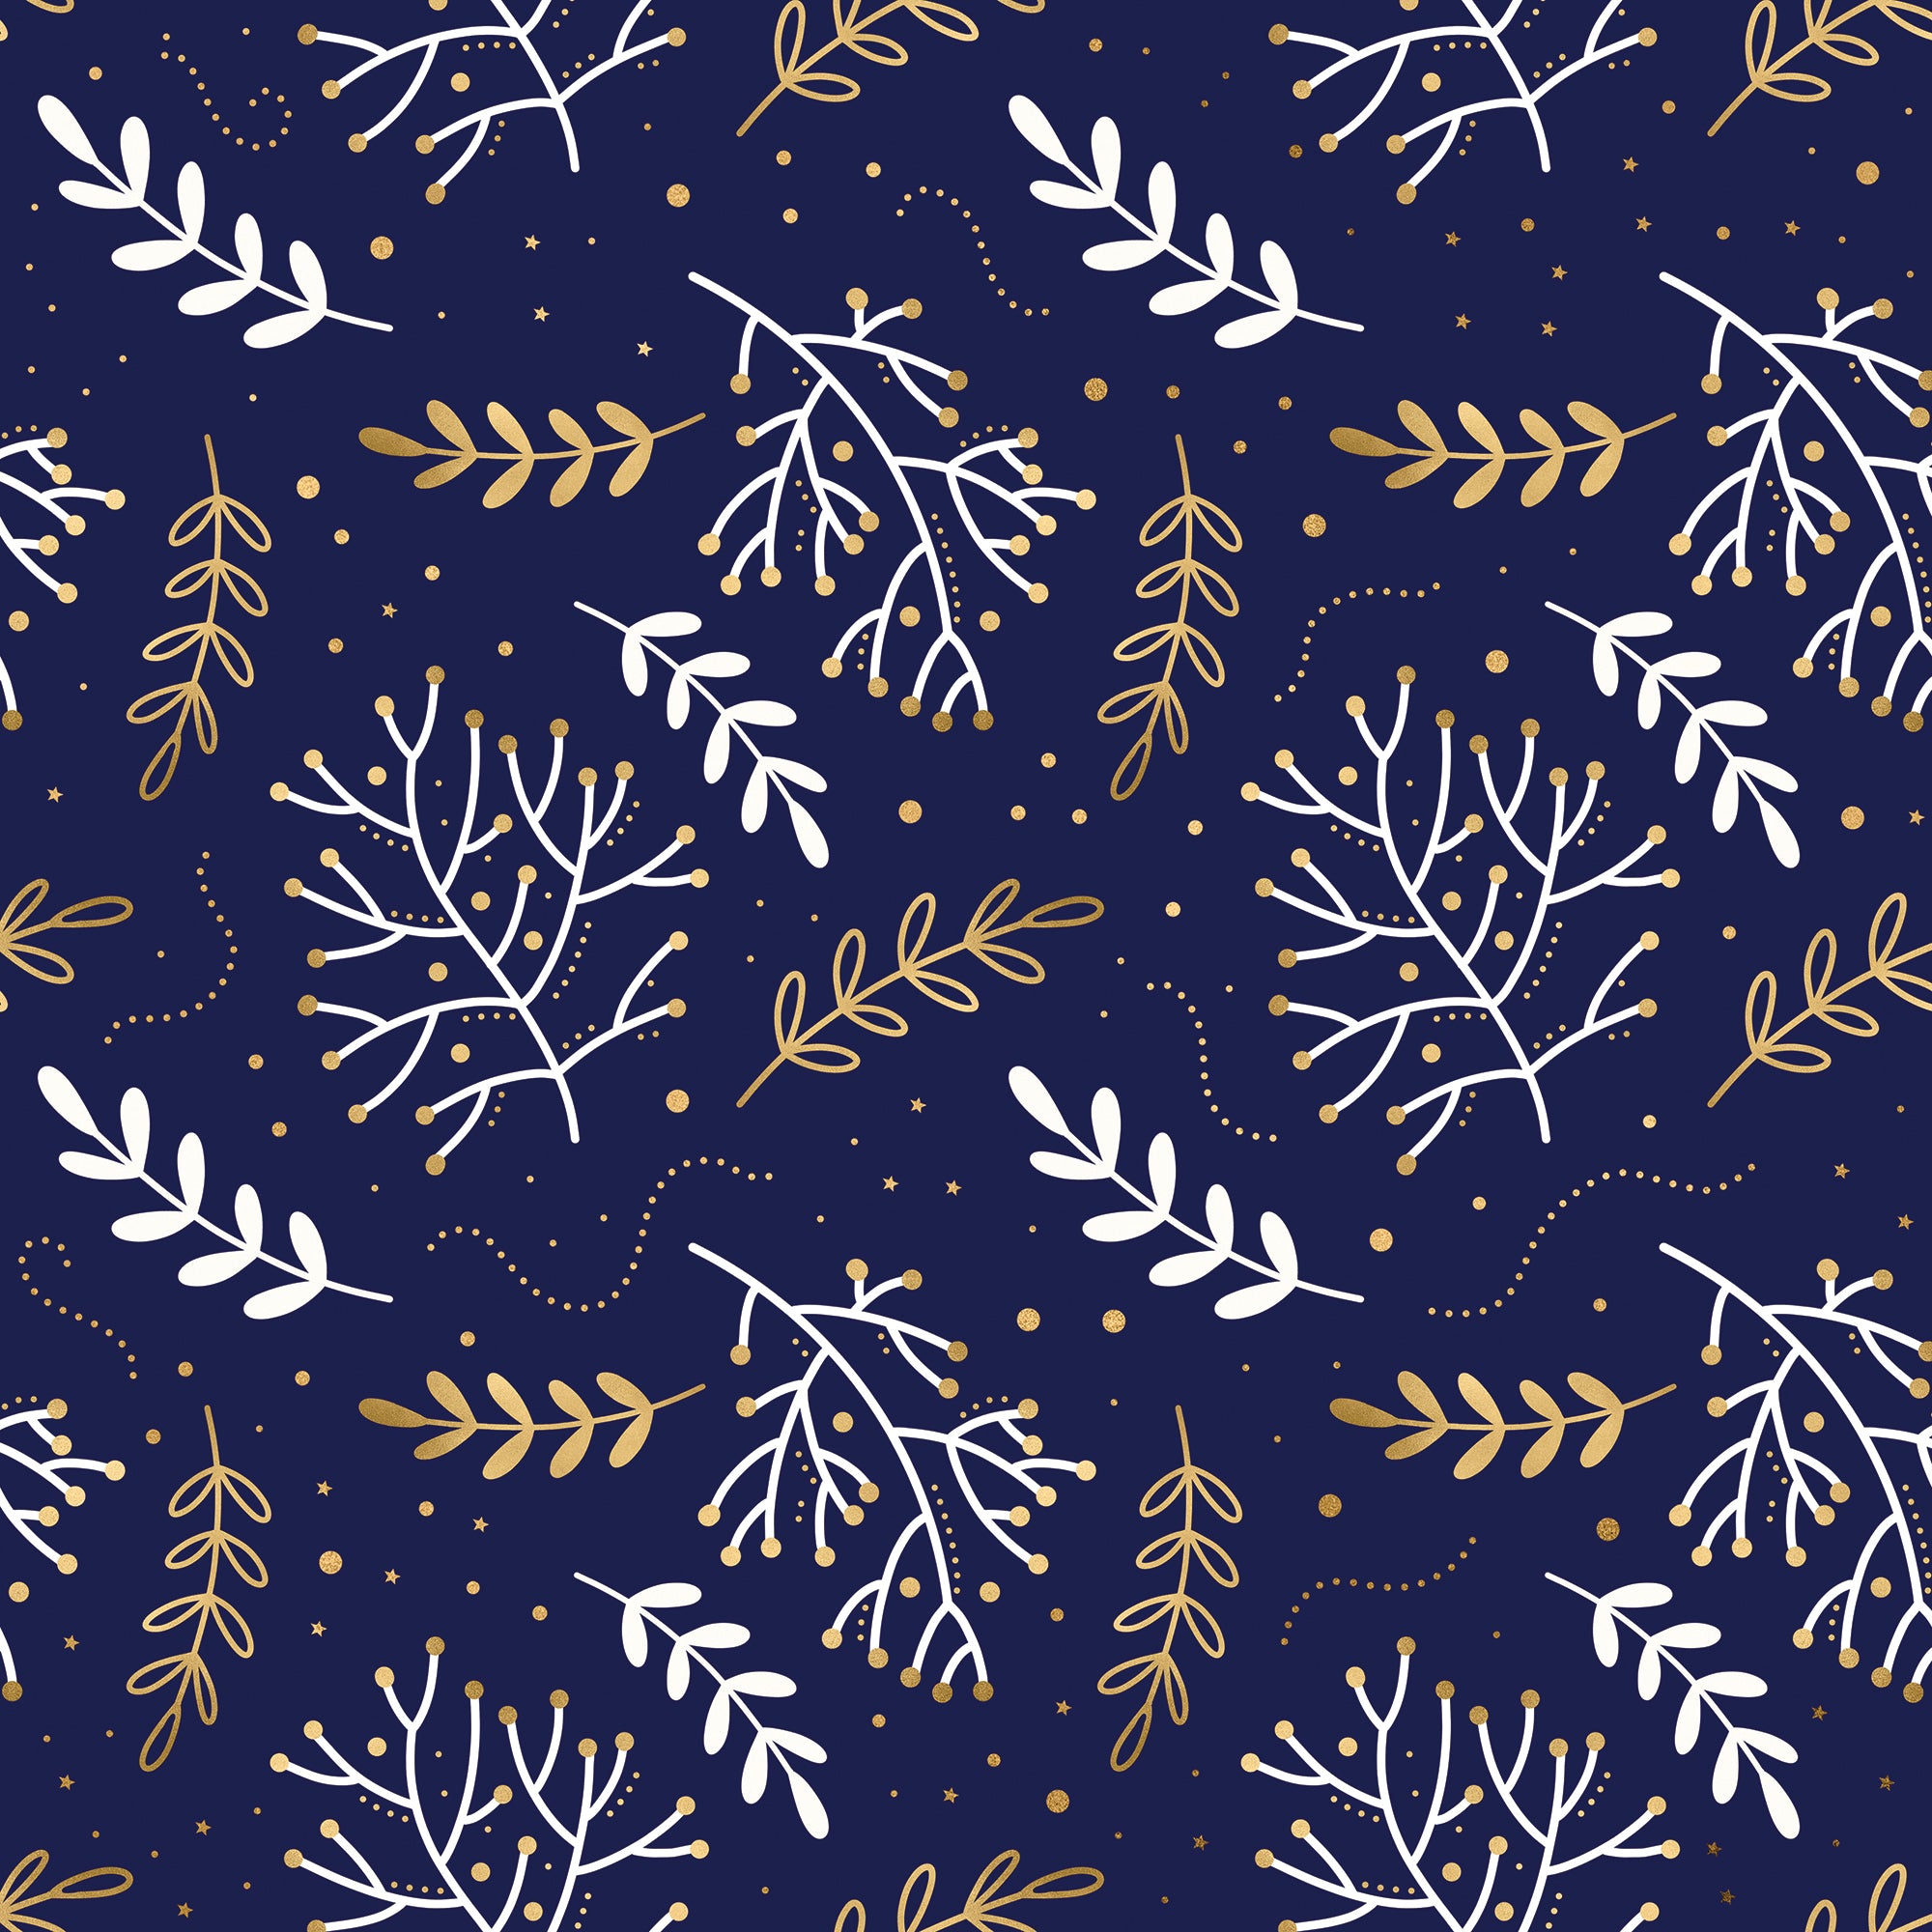 Hanukkah Branches Gift Wrap  Sustainable Plastic Free Gift Wrap -  Waterleaf Paper Company